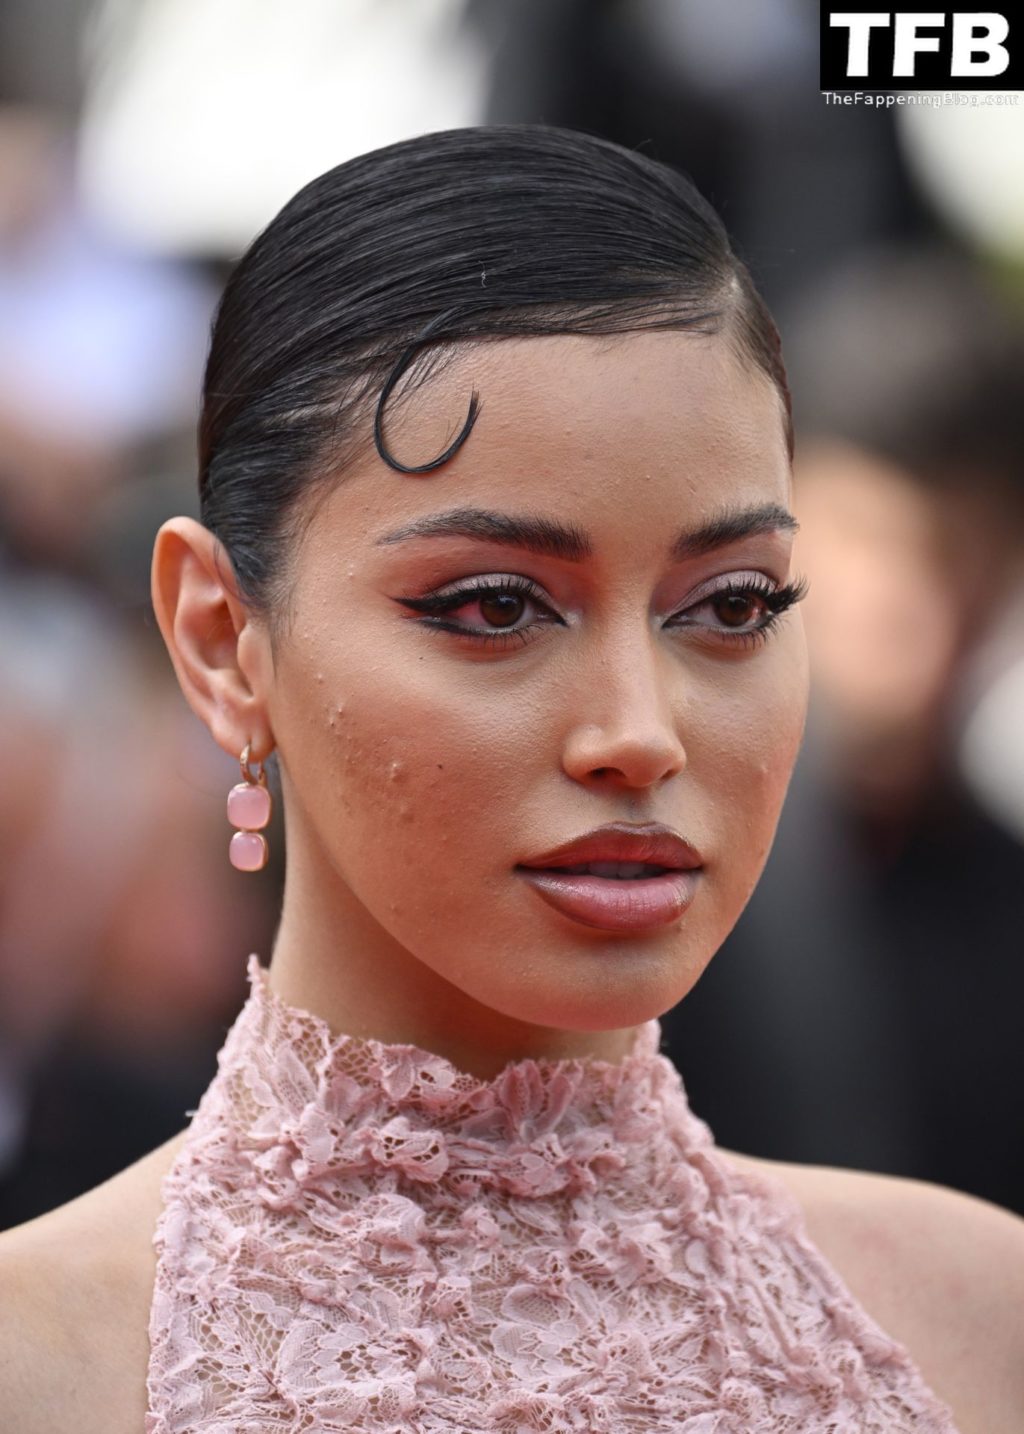 Cindy Kimberly See Through Nudity The Fappening Blog 7 2 1024x1434 - Cindy Kimberly Displays Her Nude Tits at the 75th Annual Cannes Film Festival (29 Photos)